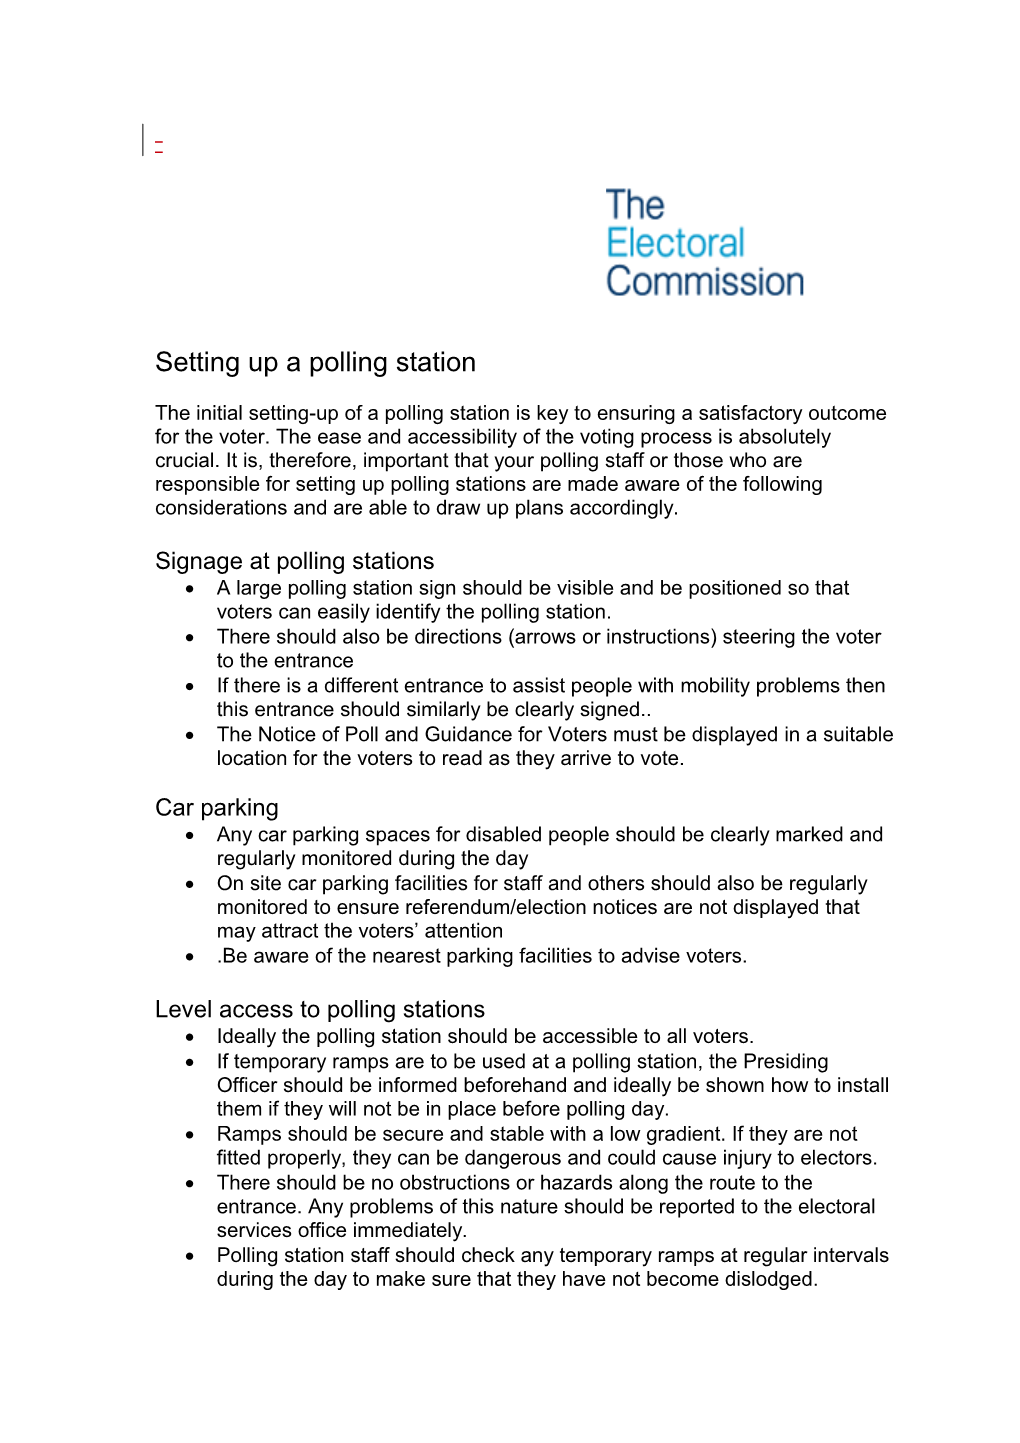 Accessibility Checklist for Polling Day Setting up a Polling